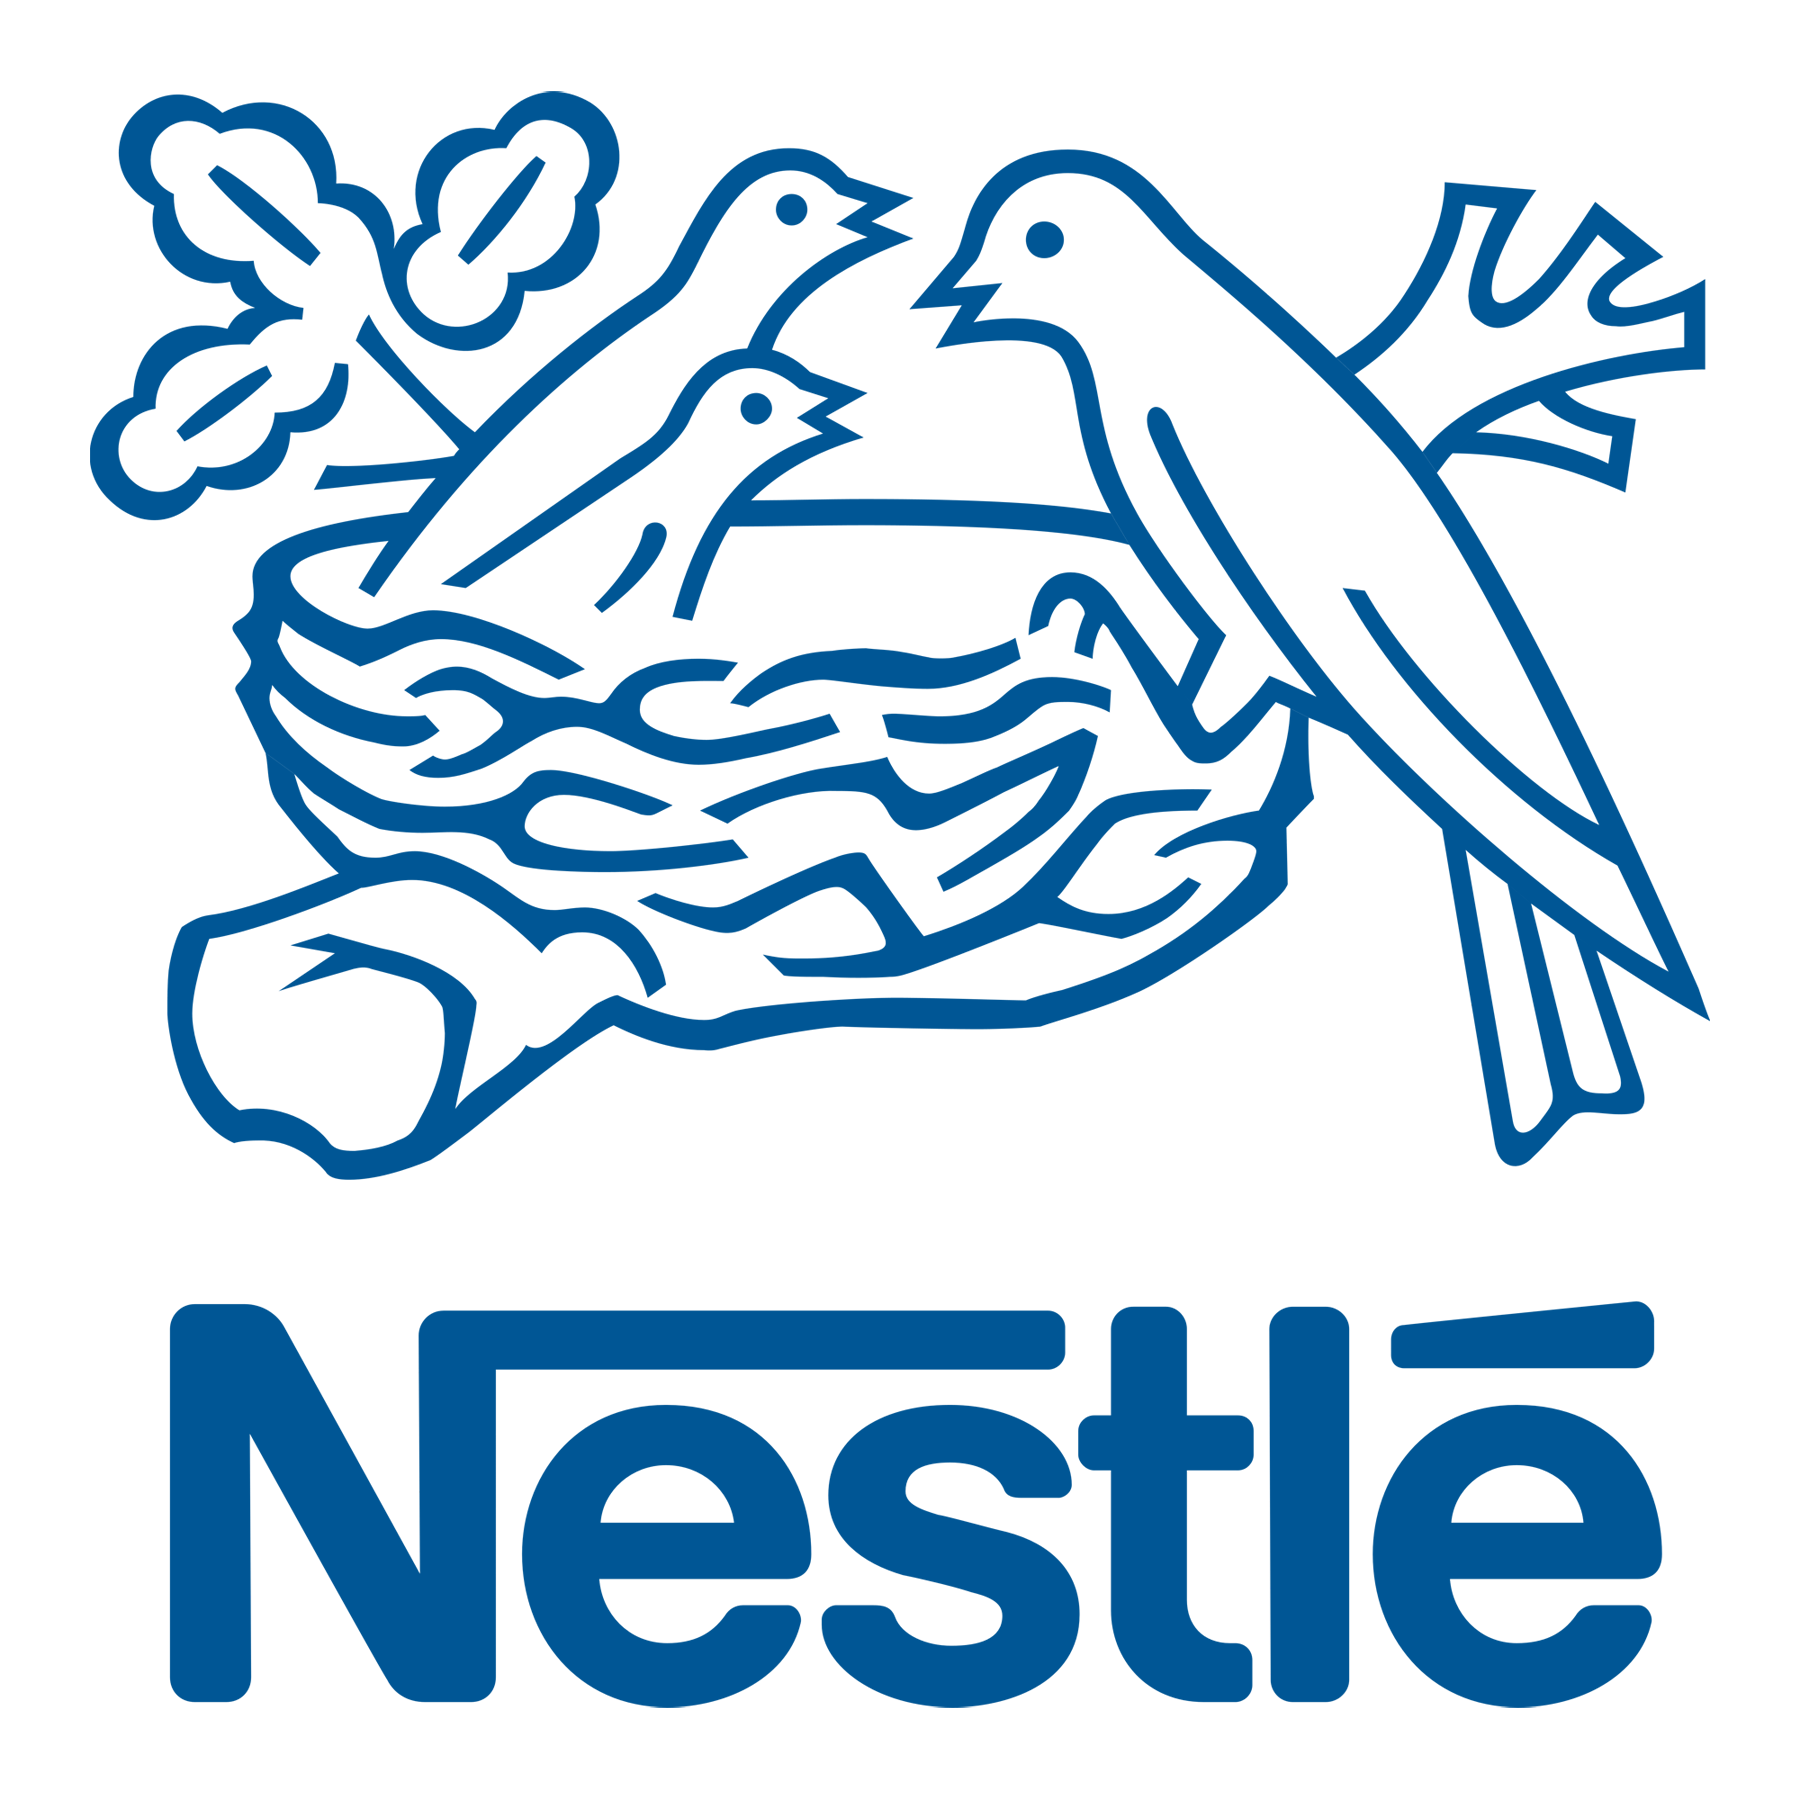 Nestle is a Aseptic packaging air monitoring customer of ChemDAQ